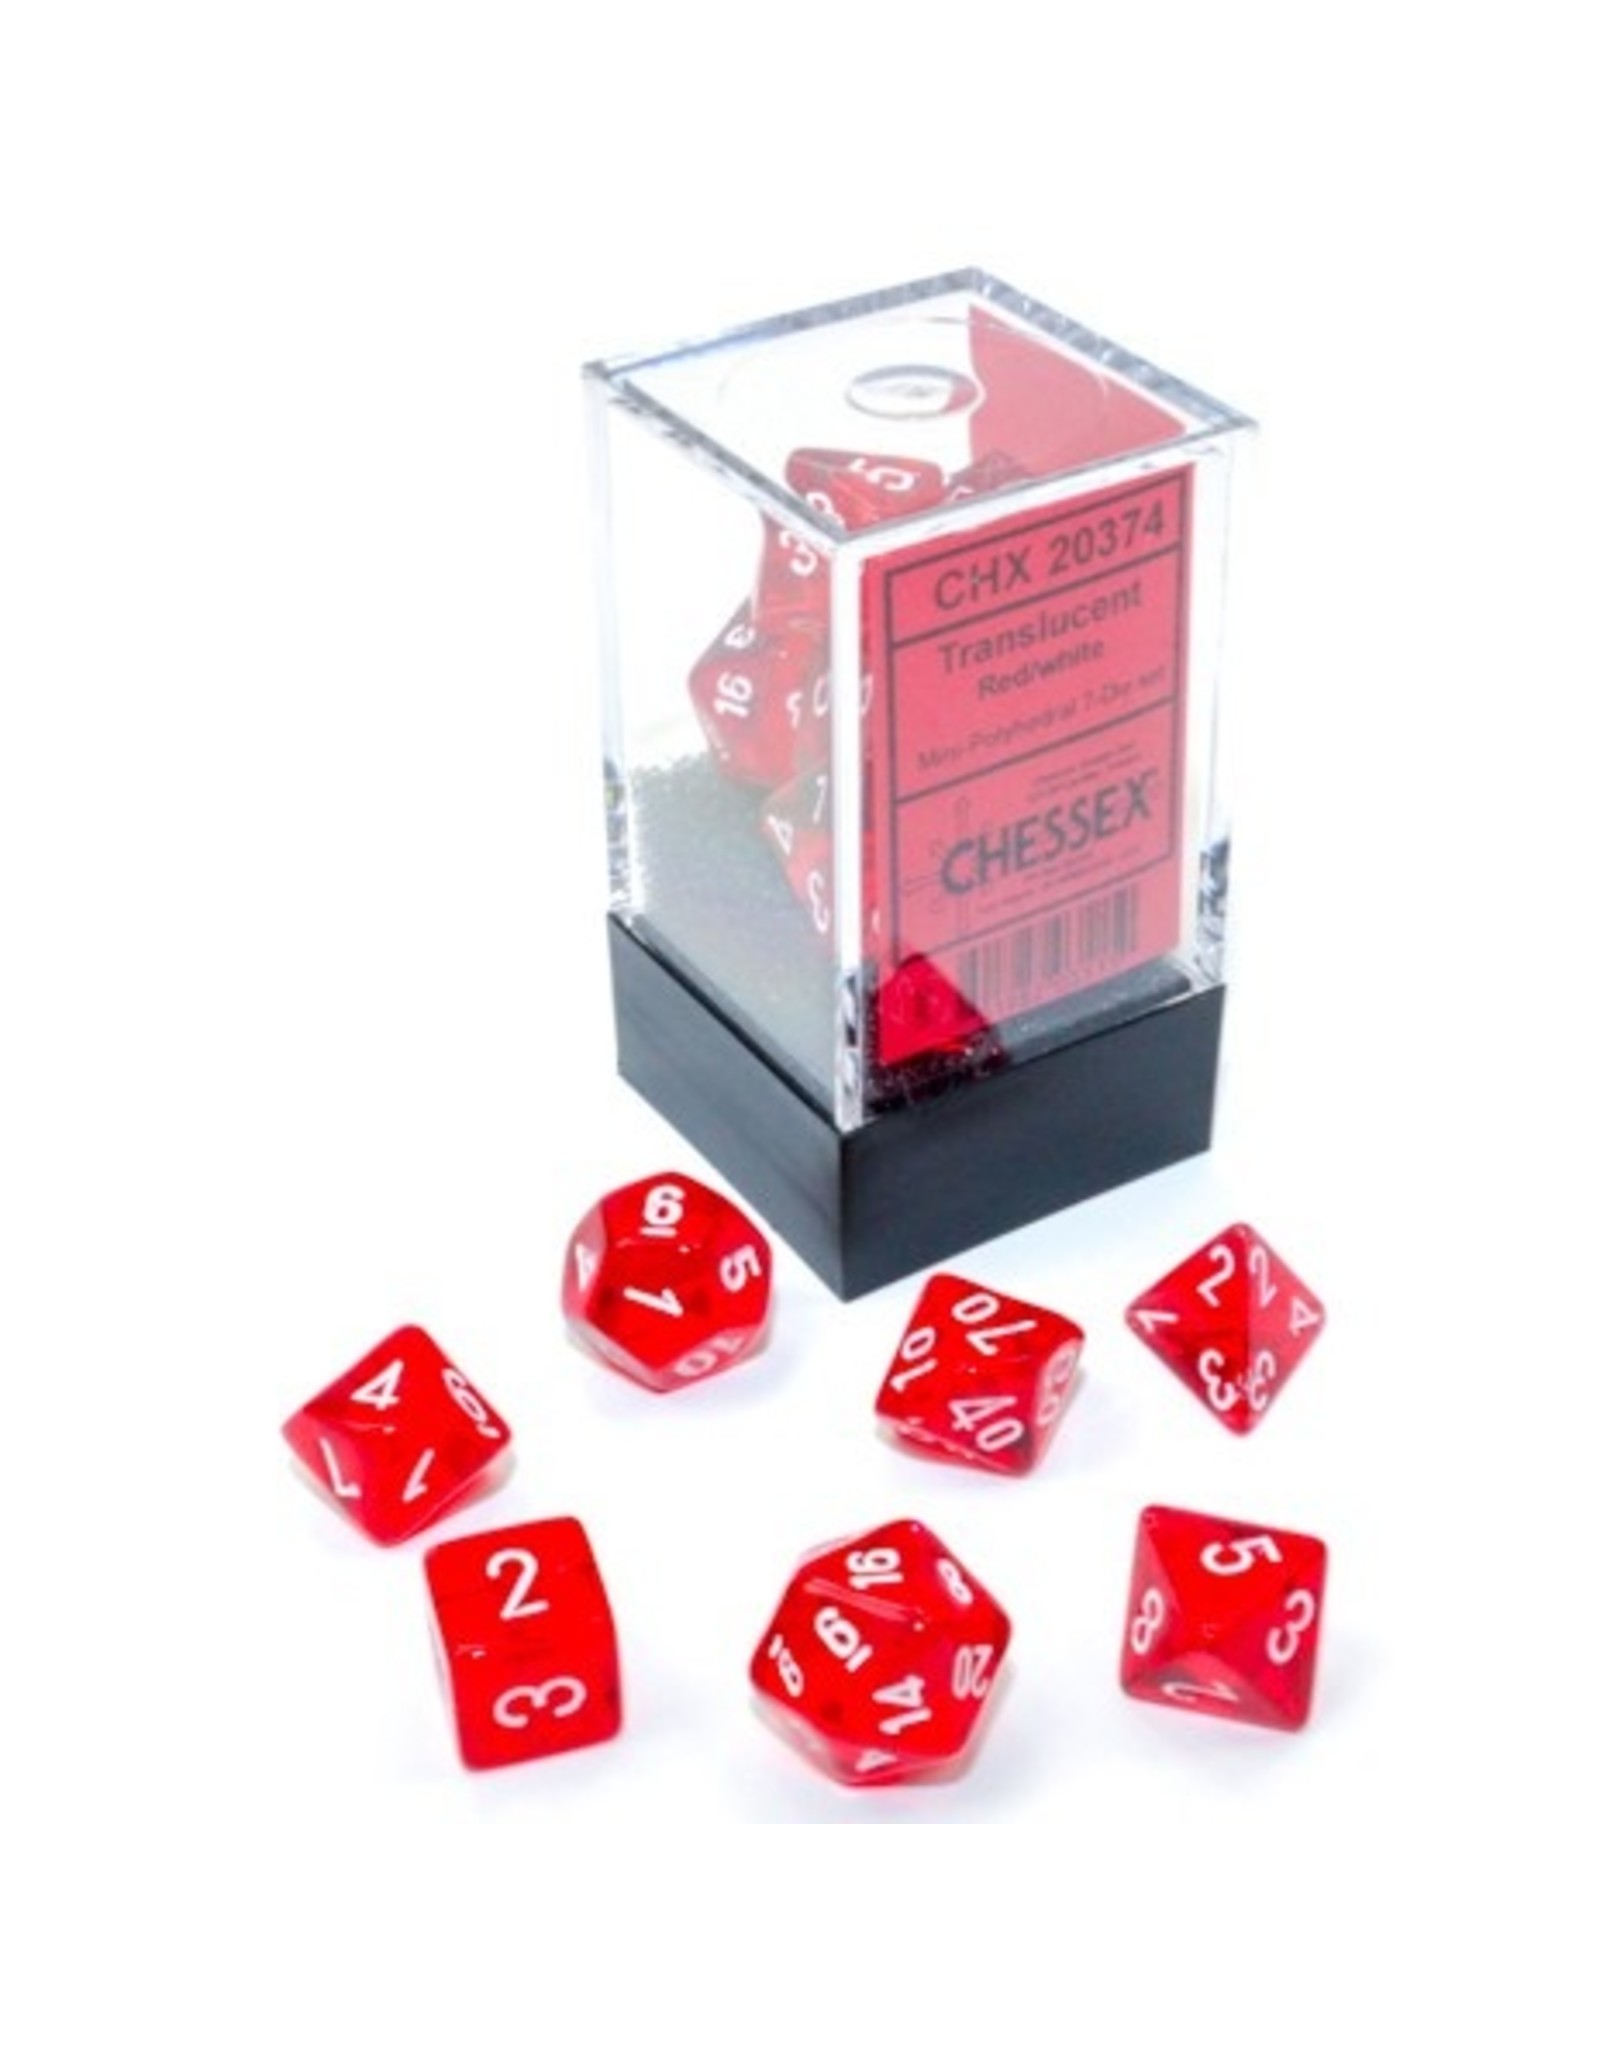 Chessex 7-set Cube Mini Translucent Red with White